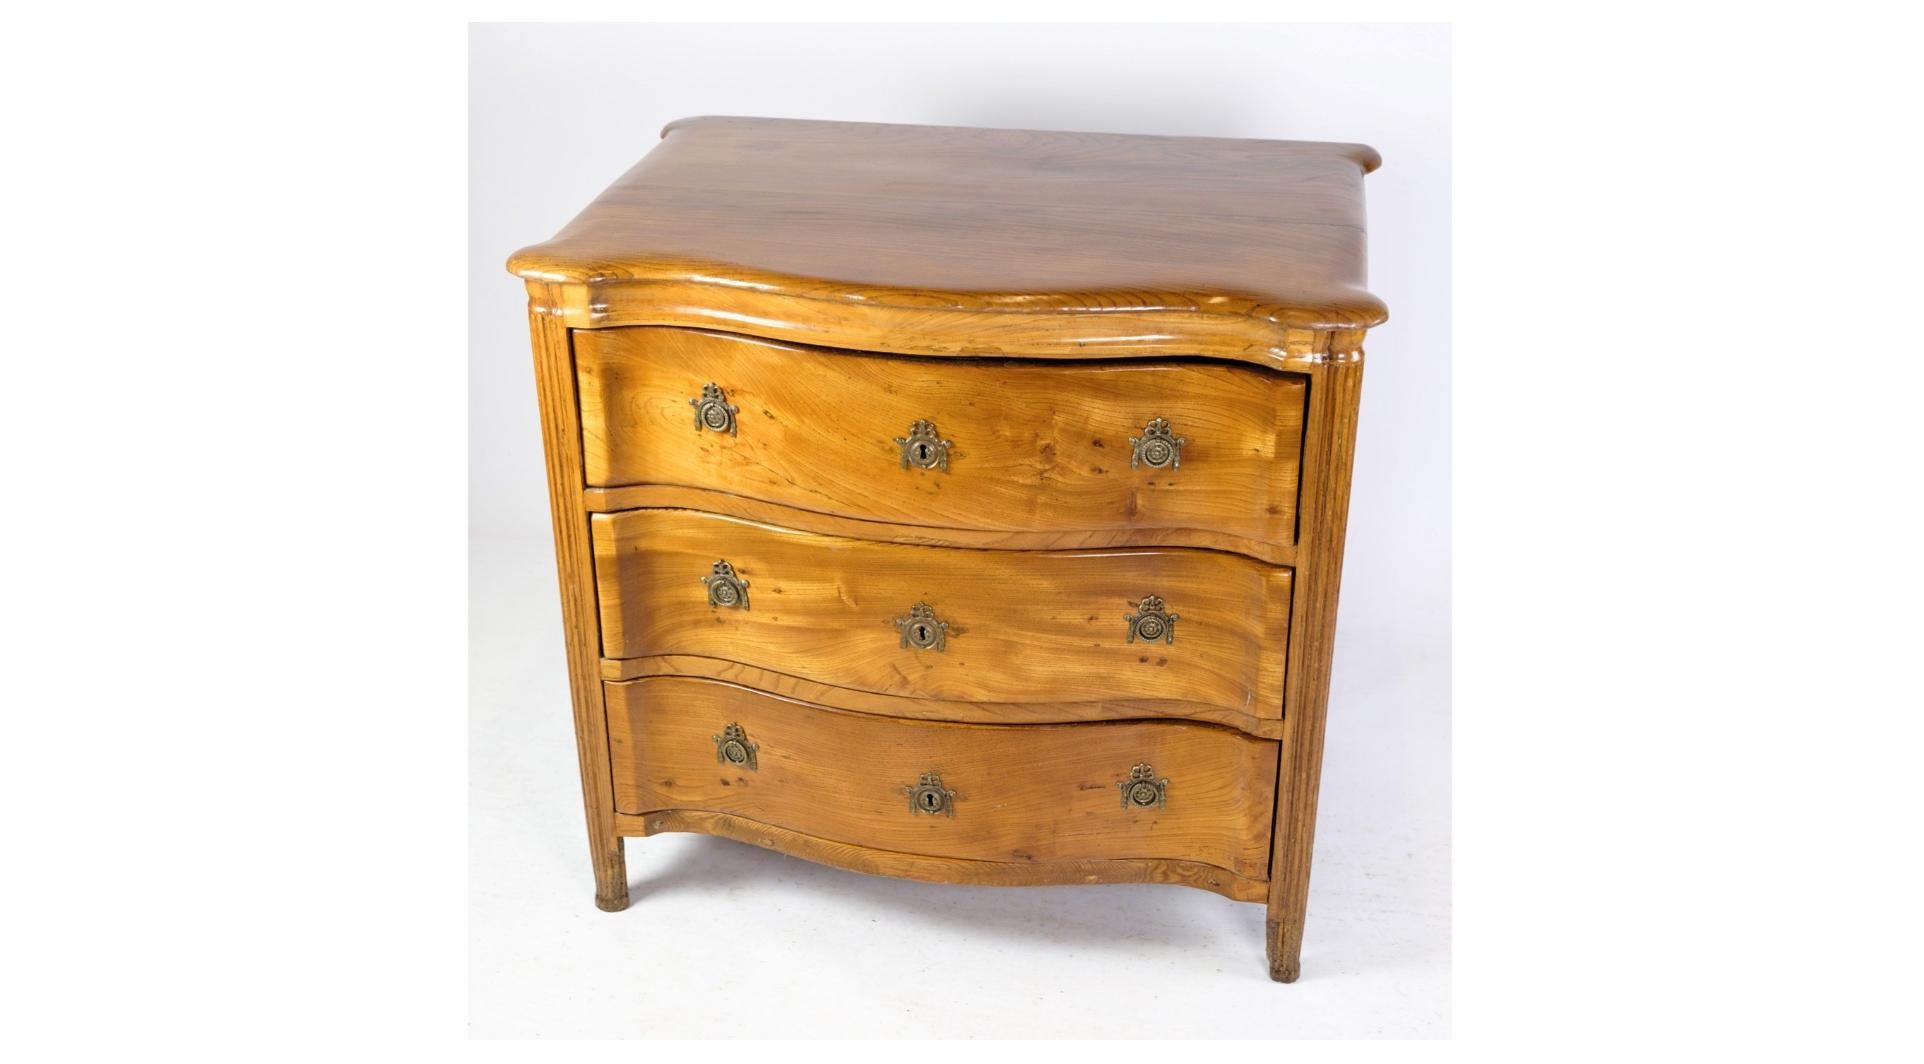 A small and exquisite Louise Seize chest of drawers crafted from elm wood, originating from Copenhagen and dating back to the late 1780s. This charming piece epitomizes the elegance and refinement of the Louise Seize (Louis XVI) style, characterized